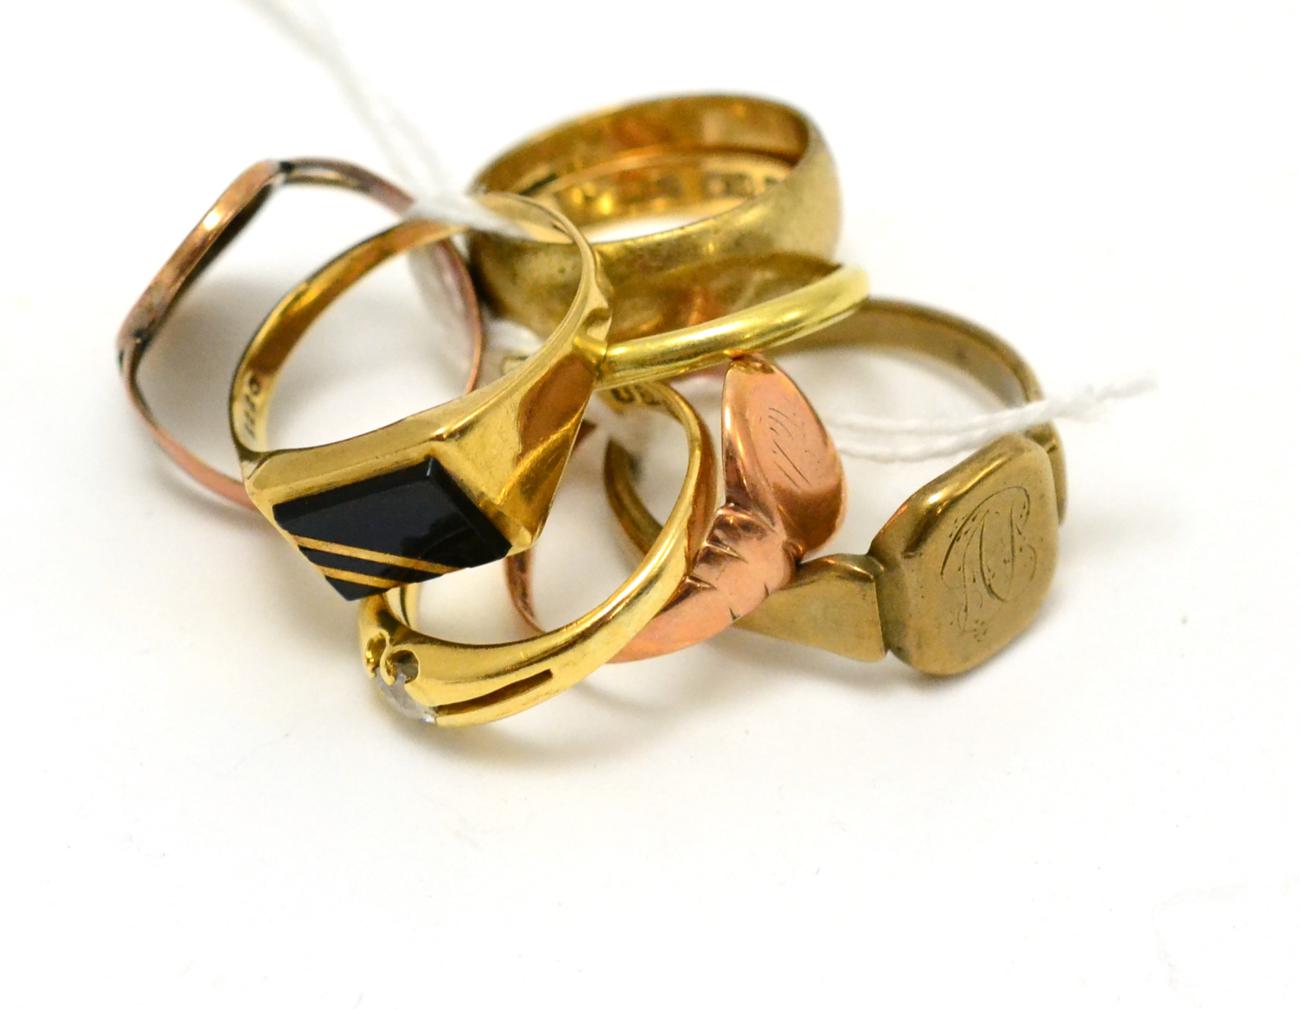 A group of rings including a 9ct gold band ring, four gents 9ct gold rings, an 18ct gold band